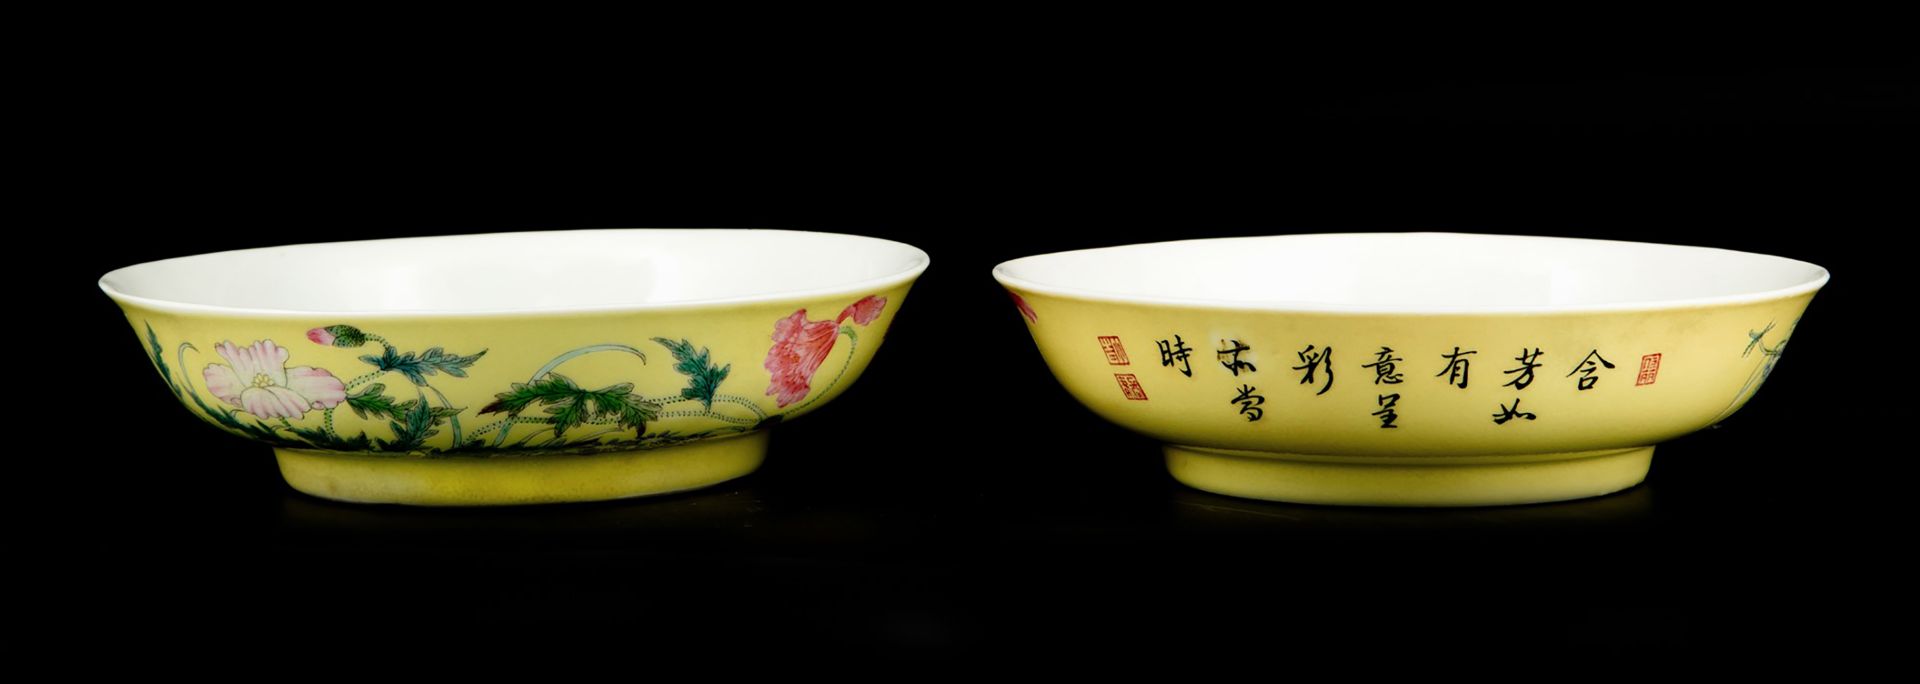 PAIR OF YELLOW-GROUND FAMILLE ROSE PORCELAIN DISHES d. 15.5 cm